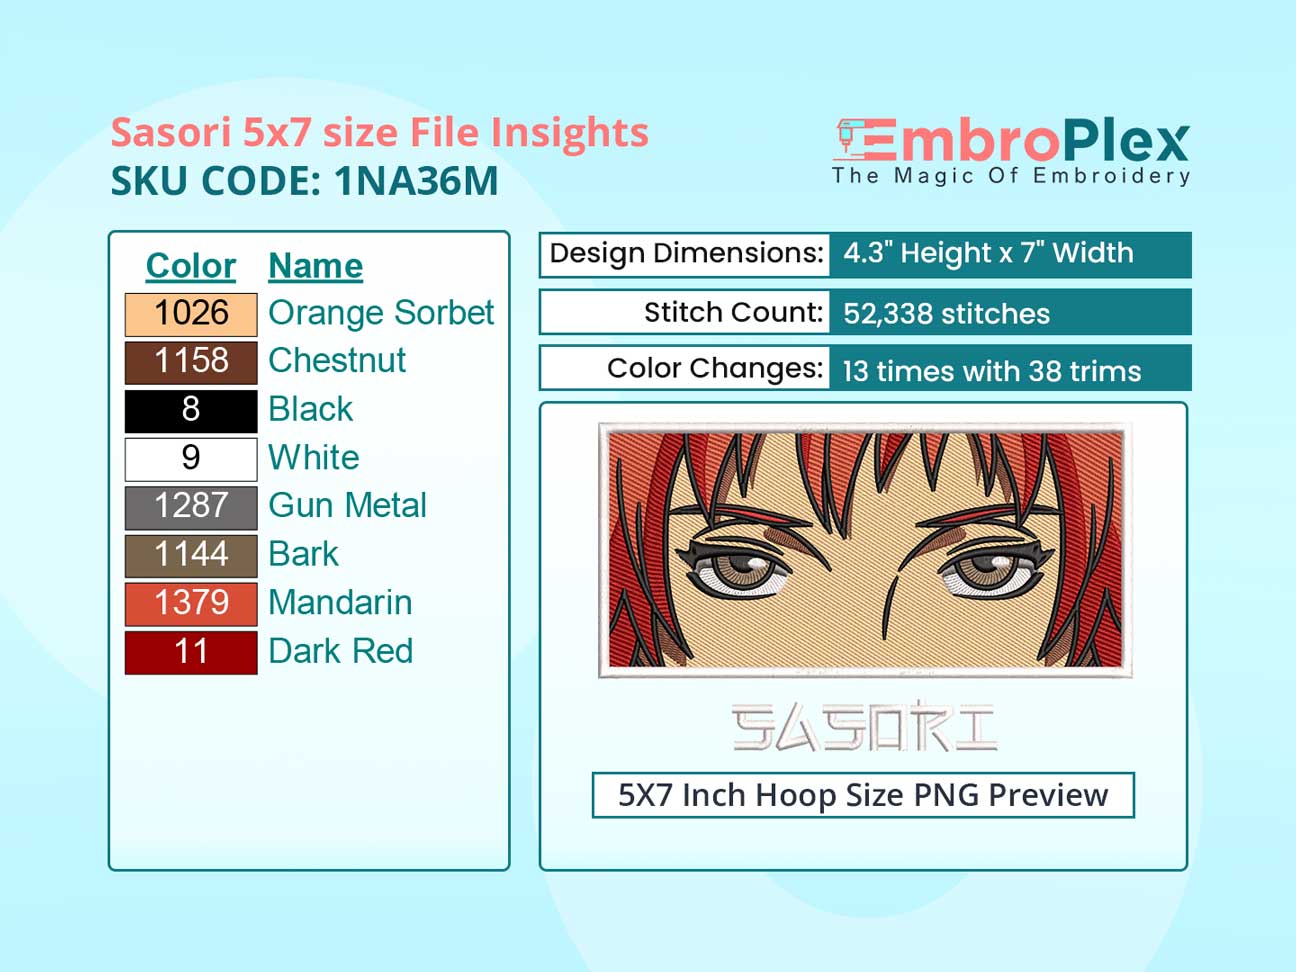 Anime-Inspired Sasori Embroidery Design File - 5x7 Inch hoop Size Variation overview image